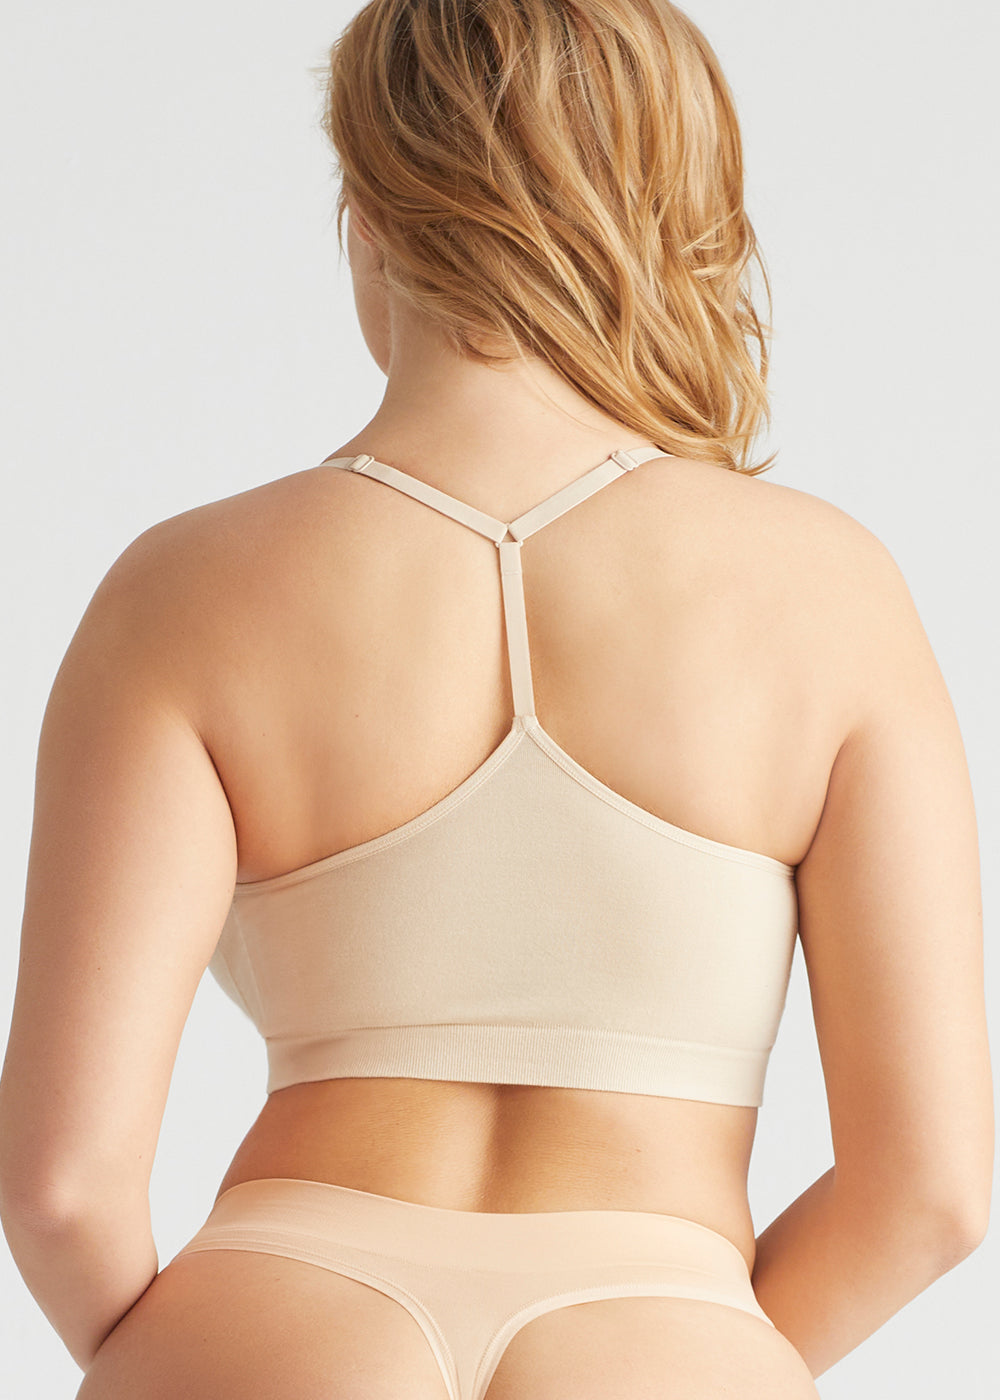 Emmie T-Back Bralette - Outlast® Seamless from Yummie in Frappe  - 1